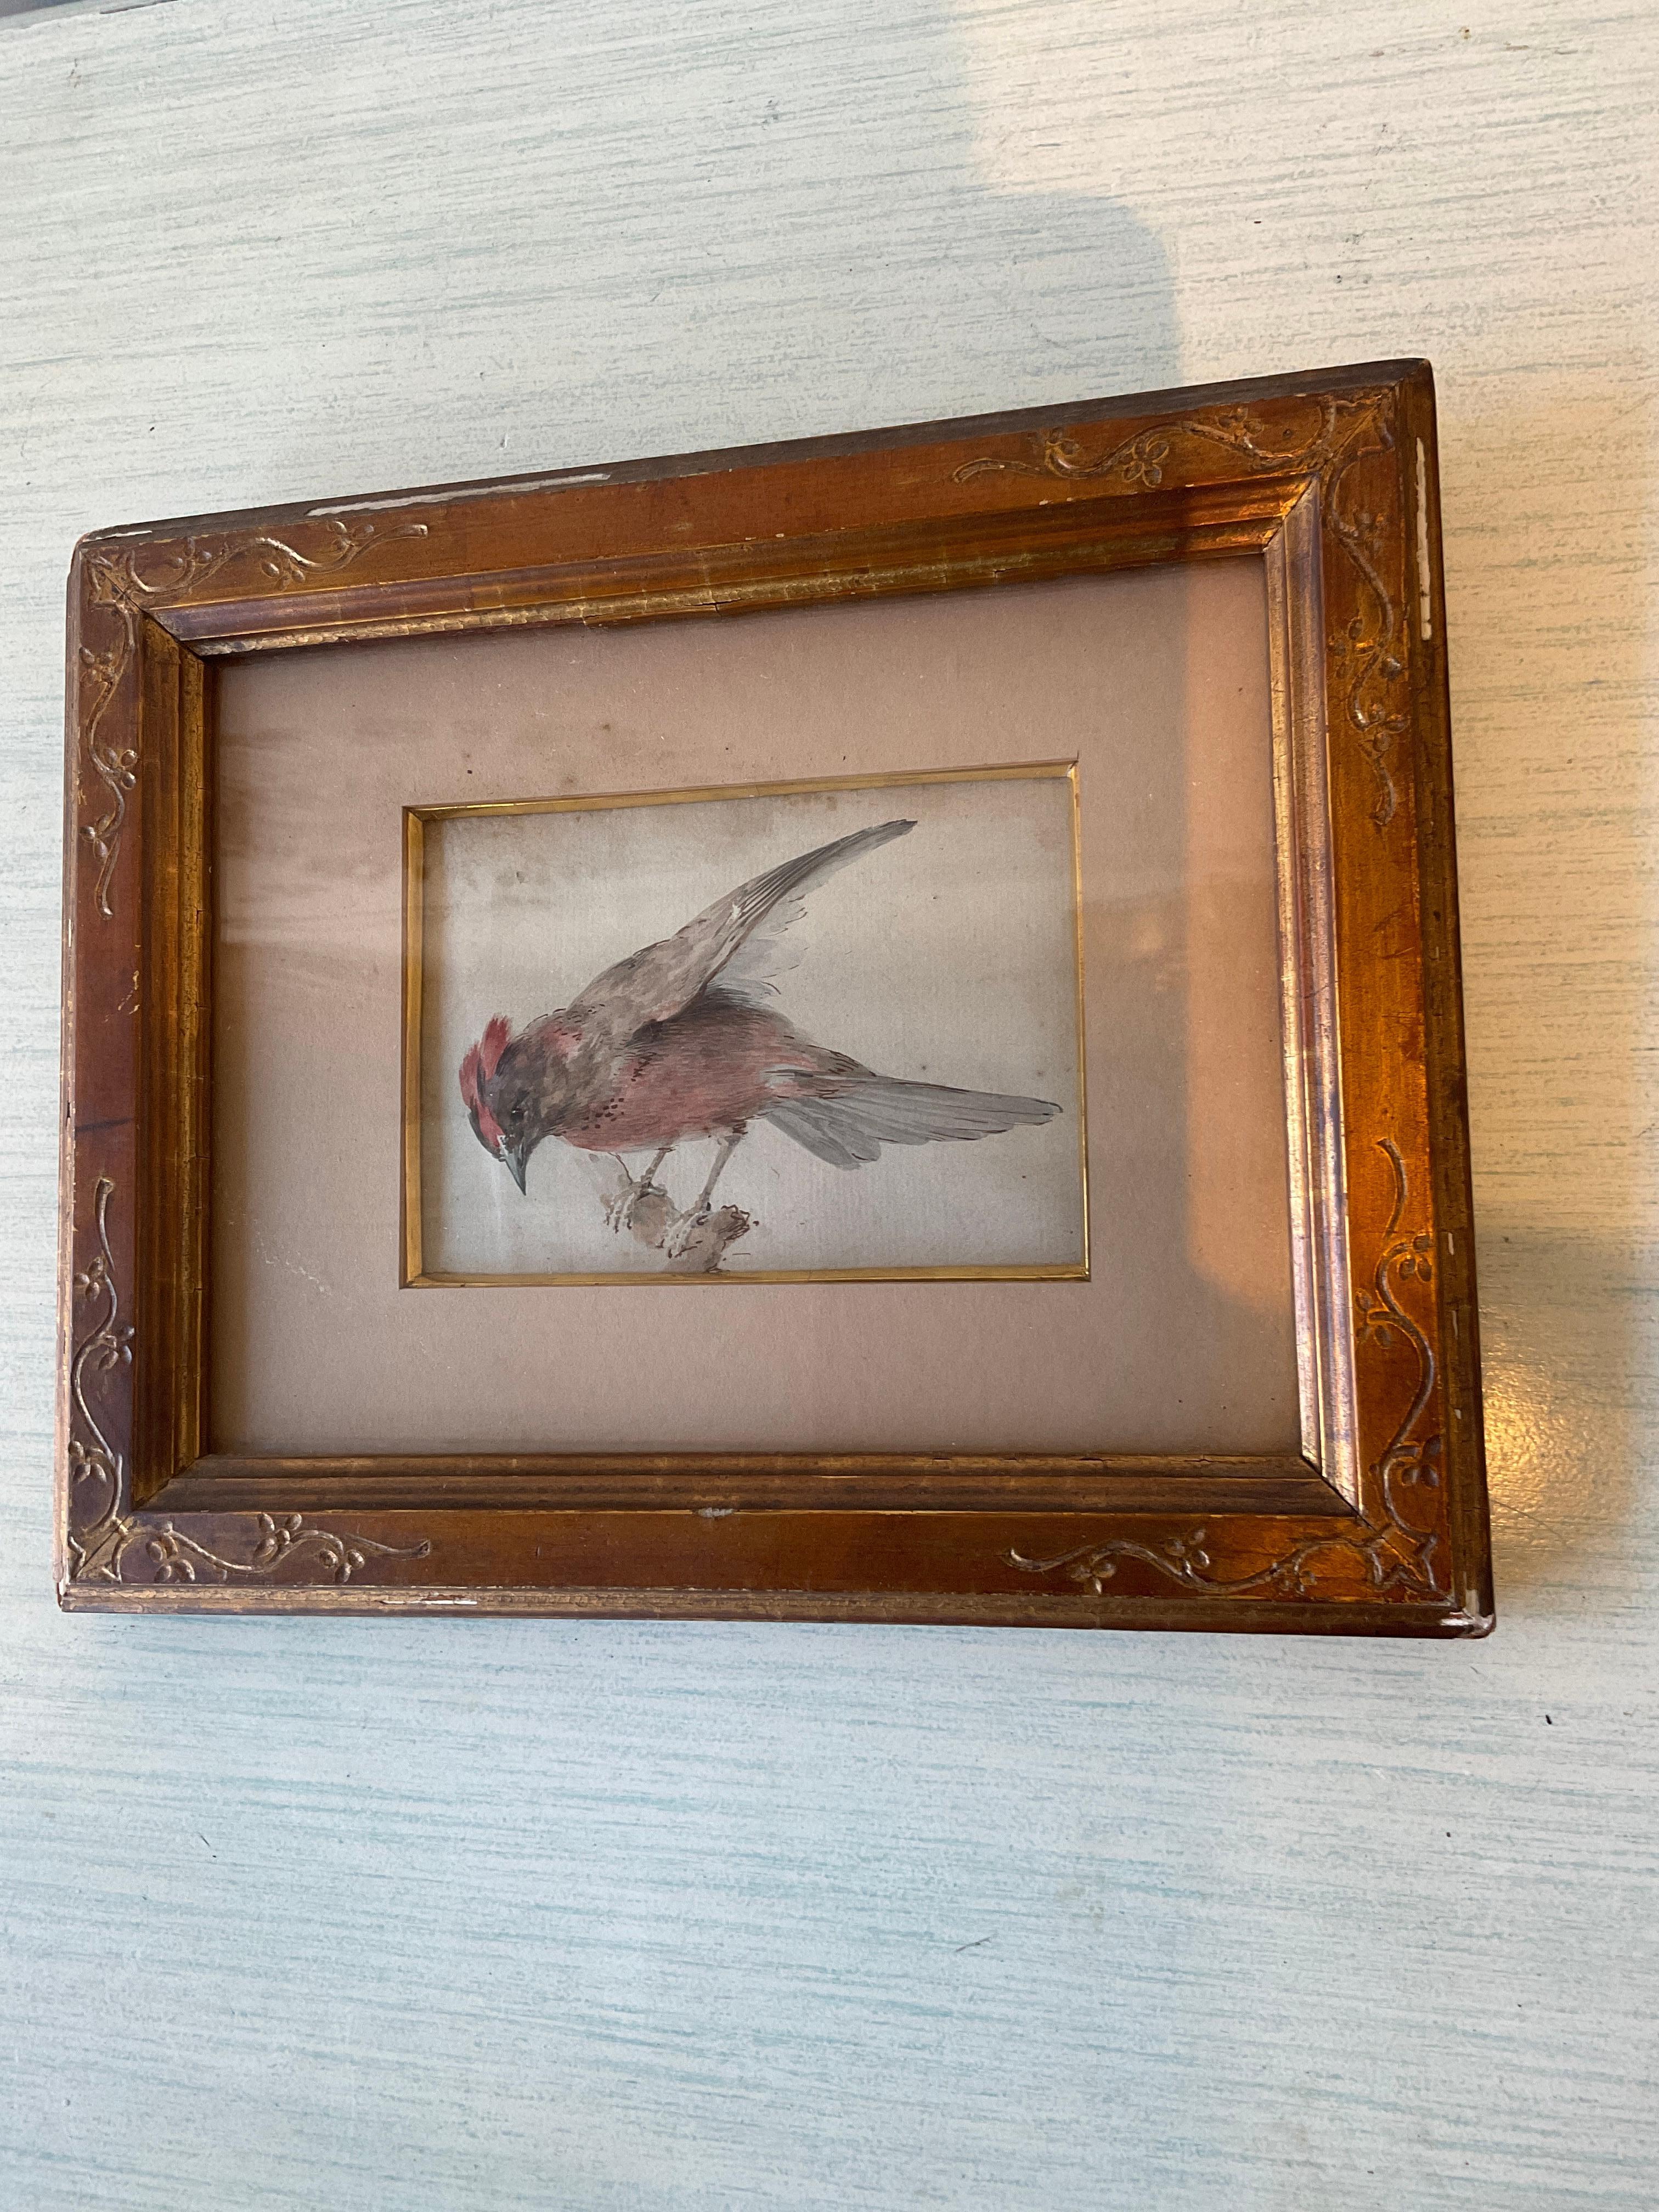 Paper 1870s Watercolor Of Bird For Sale